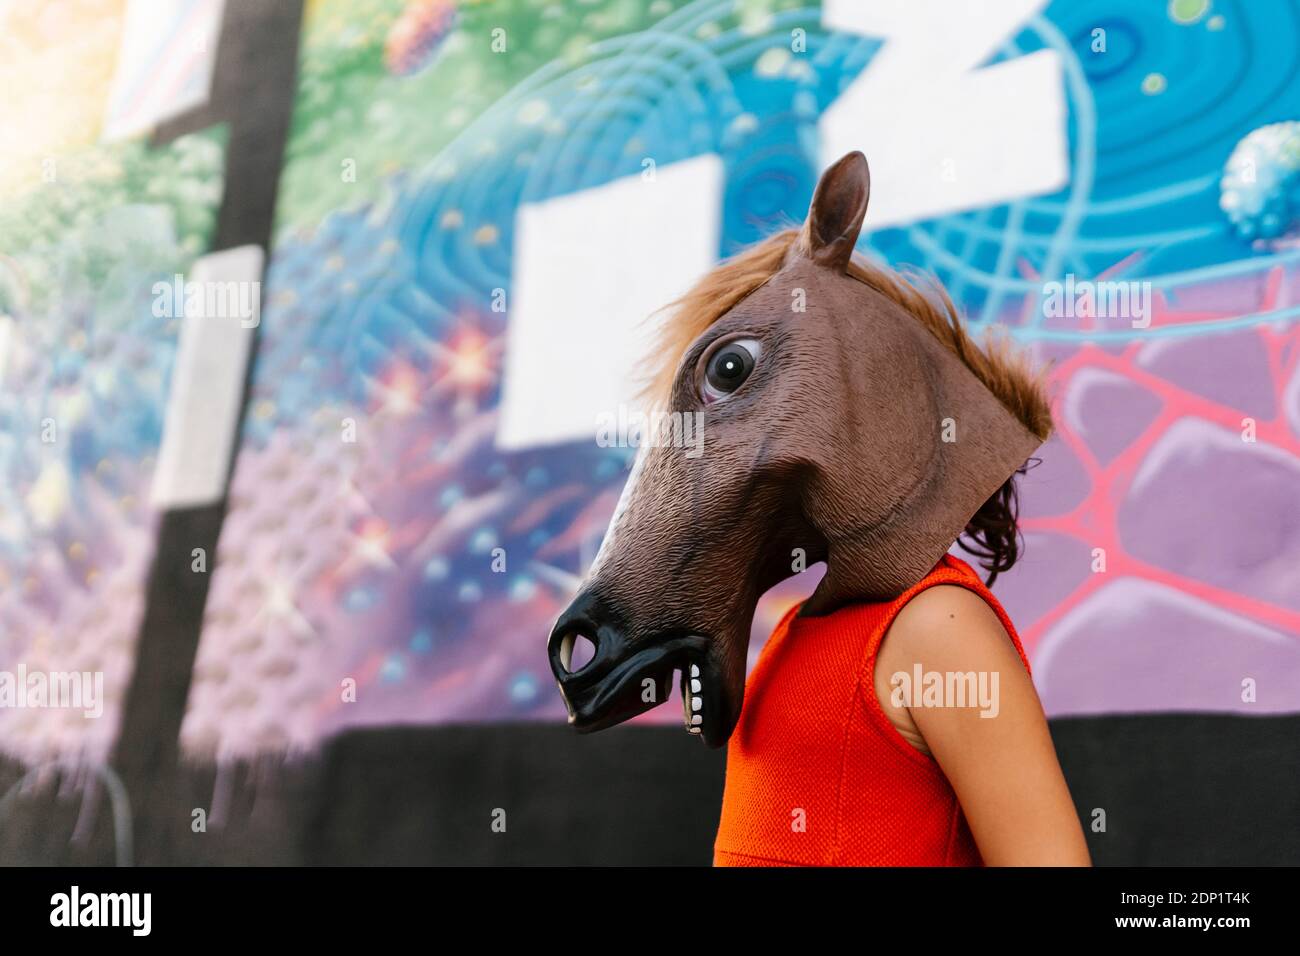 Little girl with a horse's head and a red dress next to a graffiti wall Stock Photo